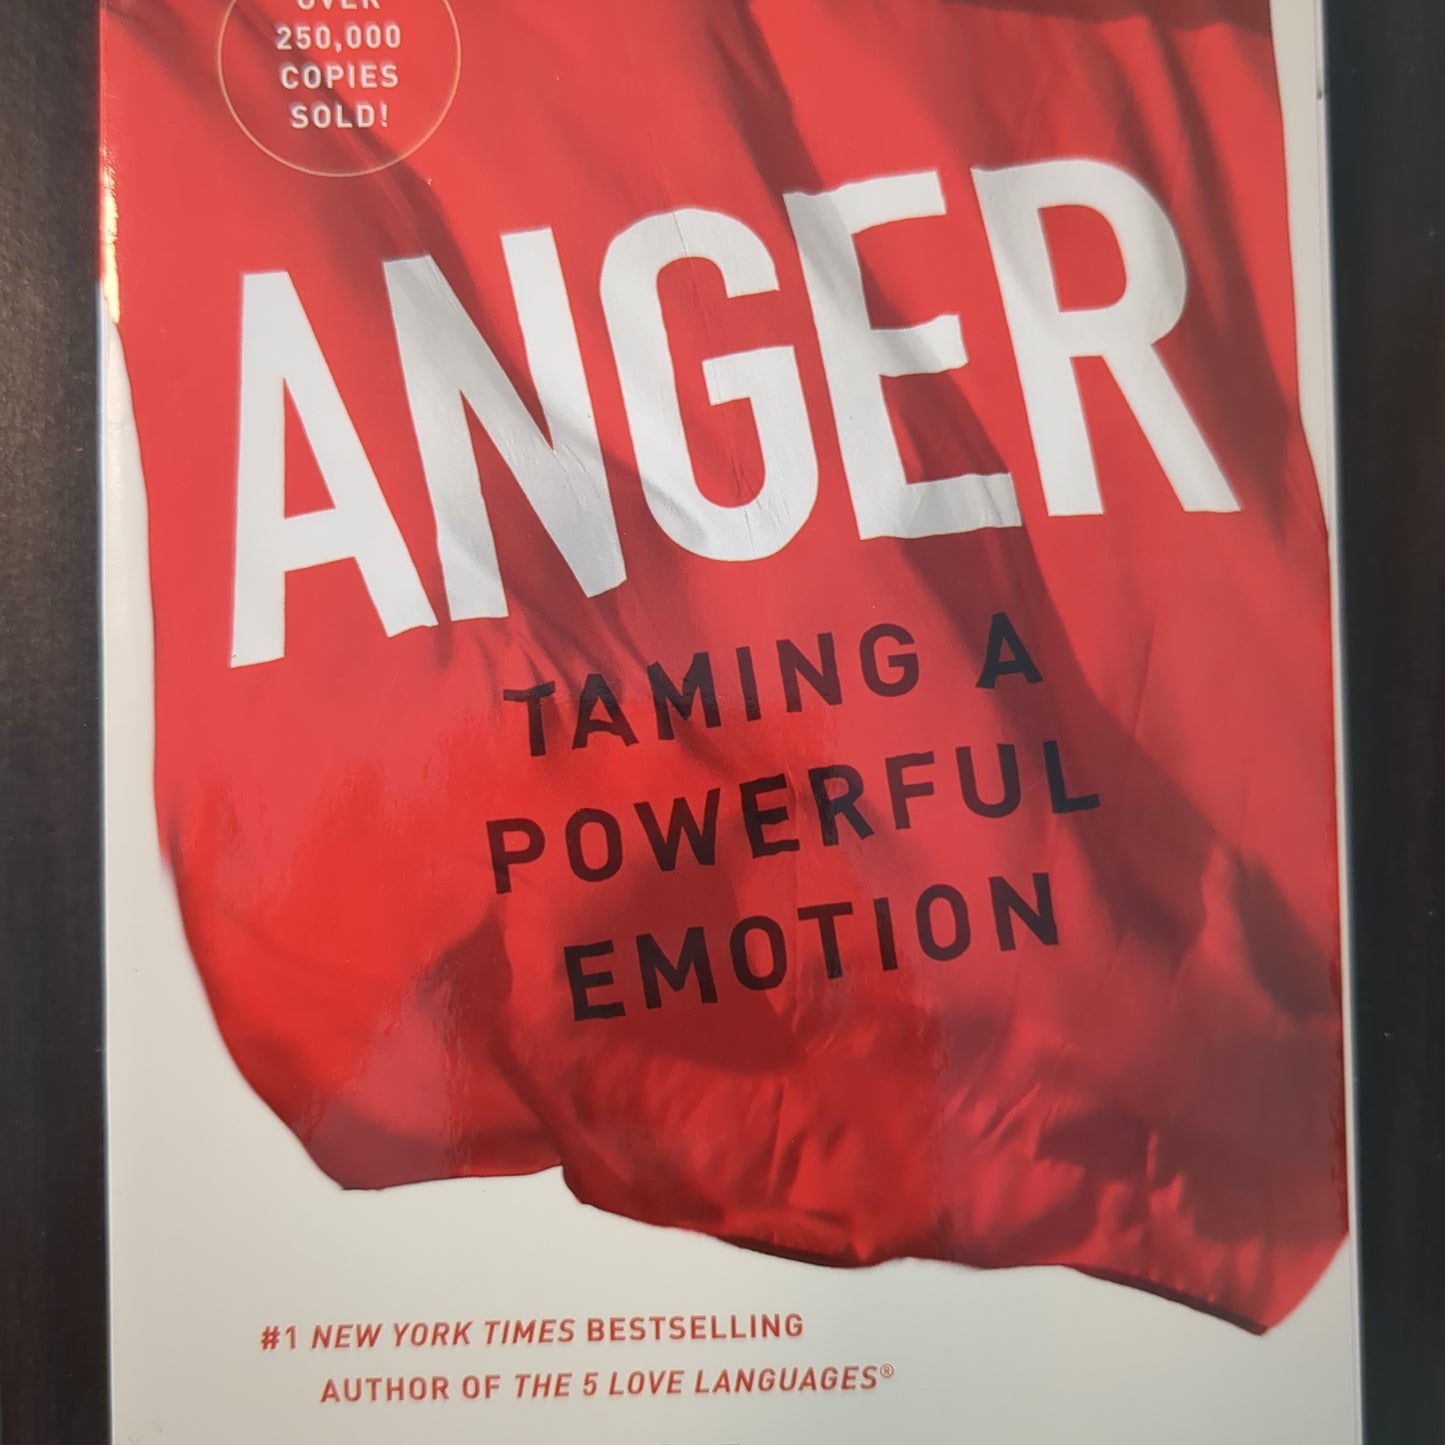 Anger taming a powerful emotion